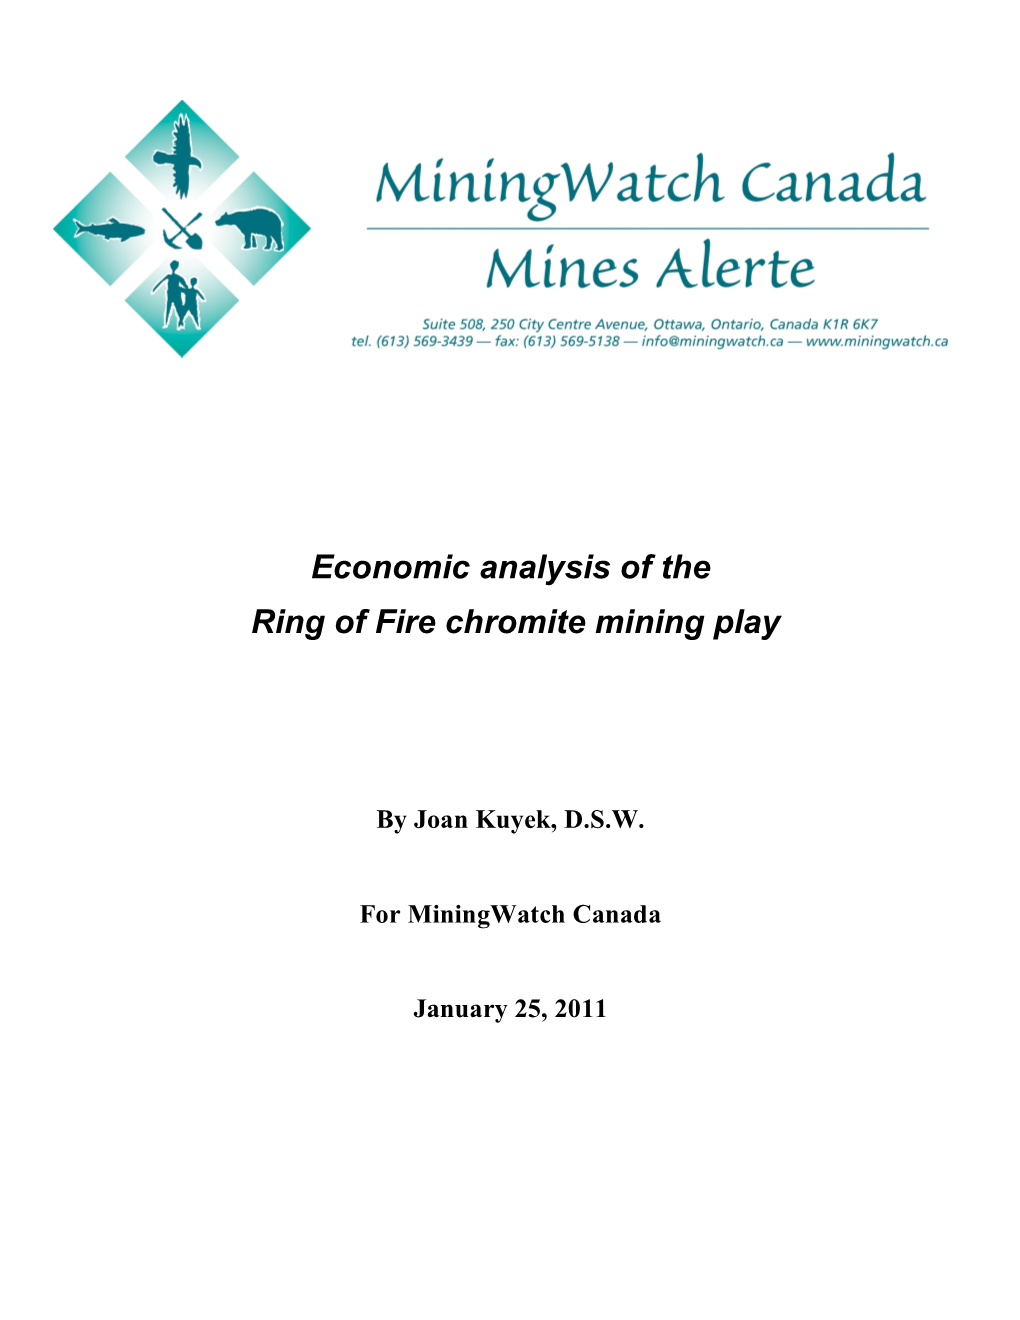 Economic Analysis of the Ring of Fire Chromite Mining Play